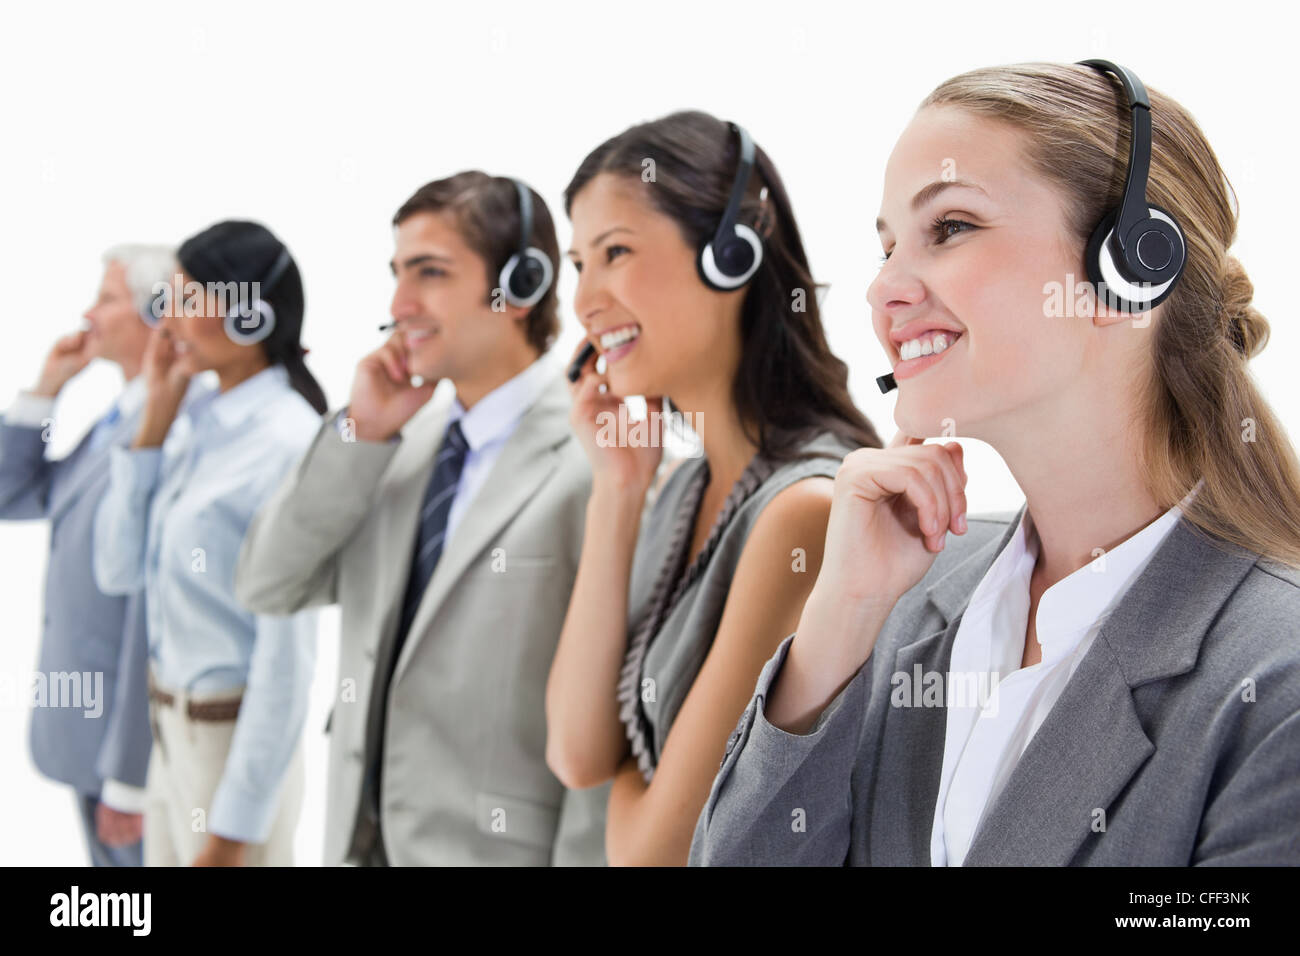 Smiling professionals with headsets Stock Photo